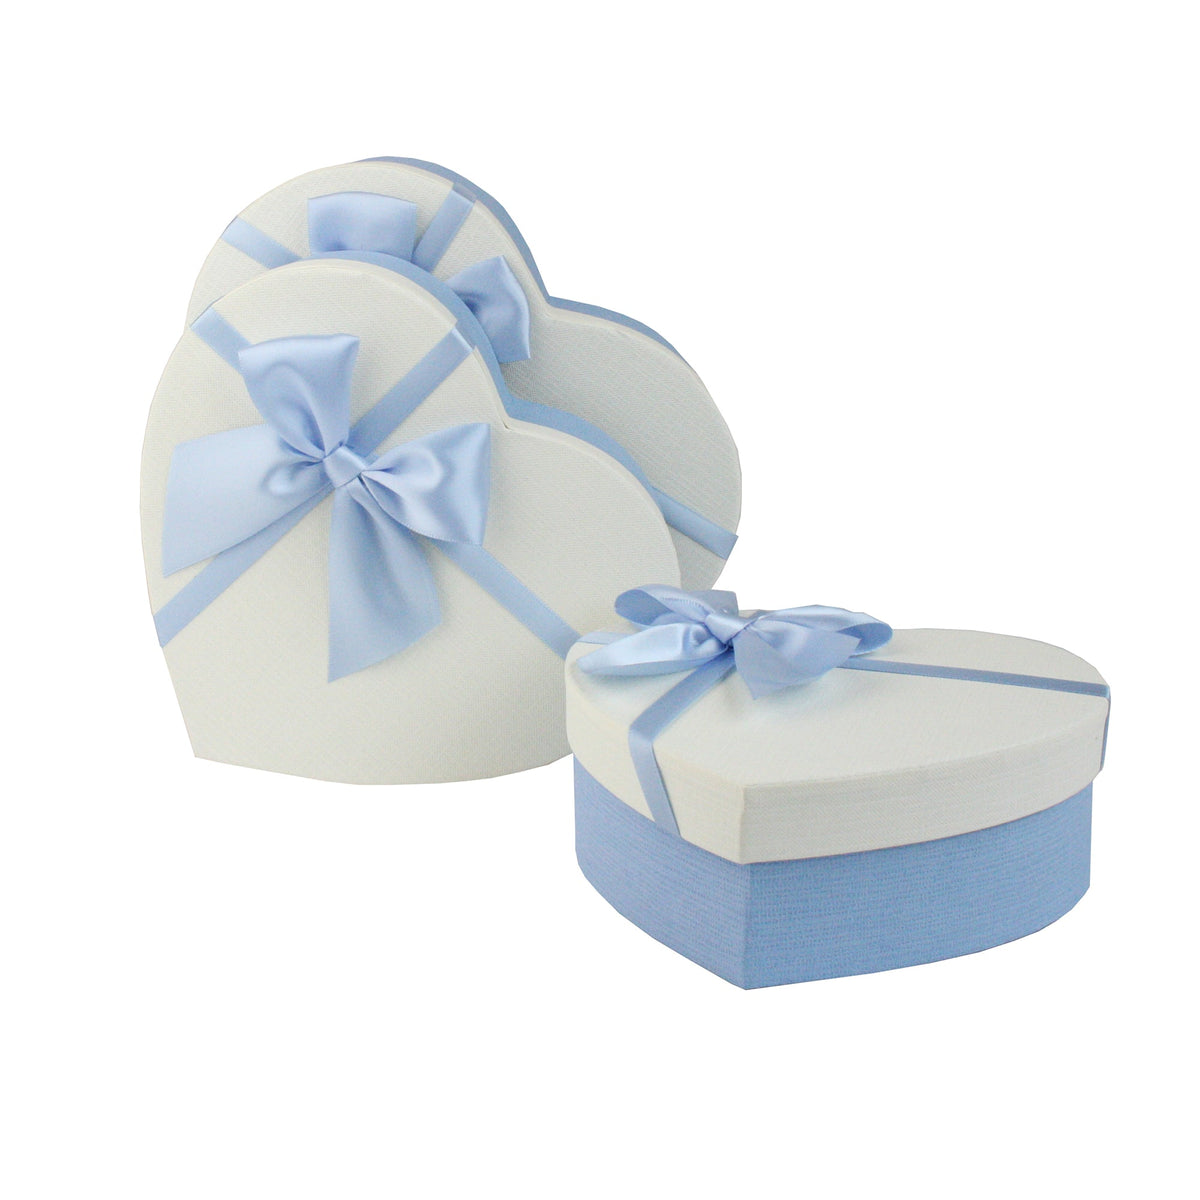 Set of 3 Heart Blue/White Gift Boxes with Blue Satin Ribbon